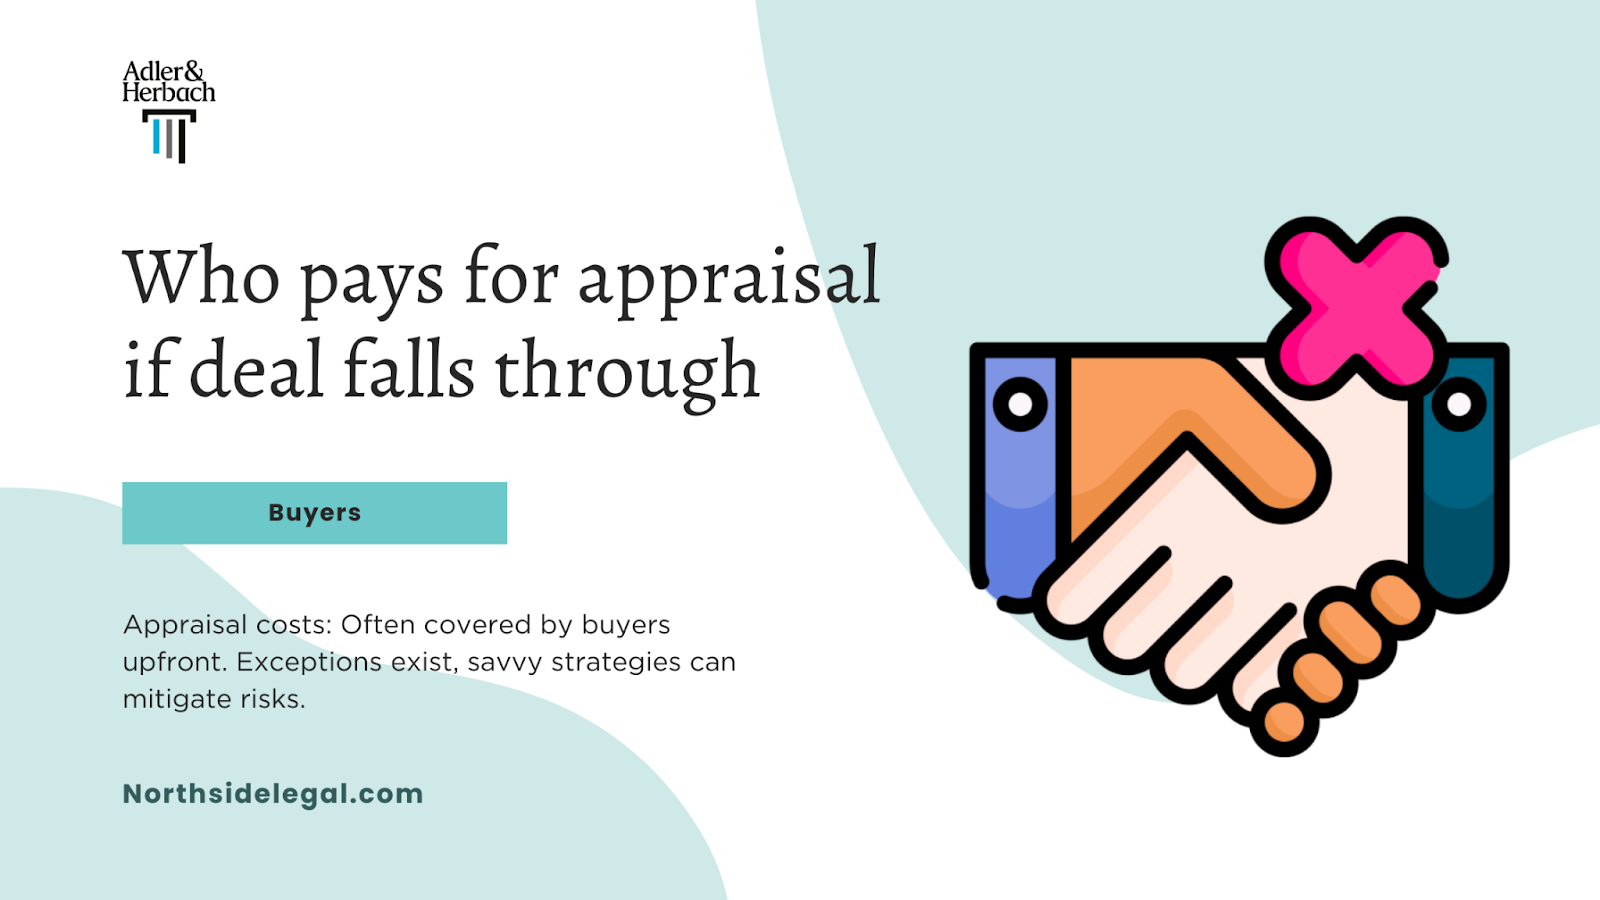 Who pays for appraisal if deal falls through?